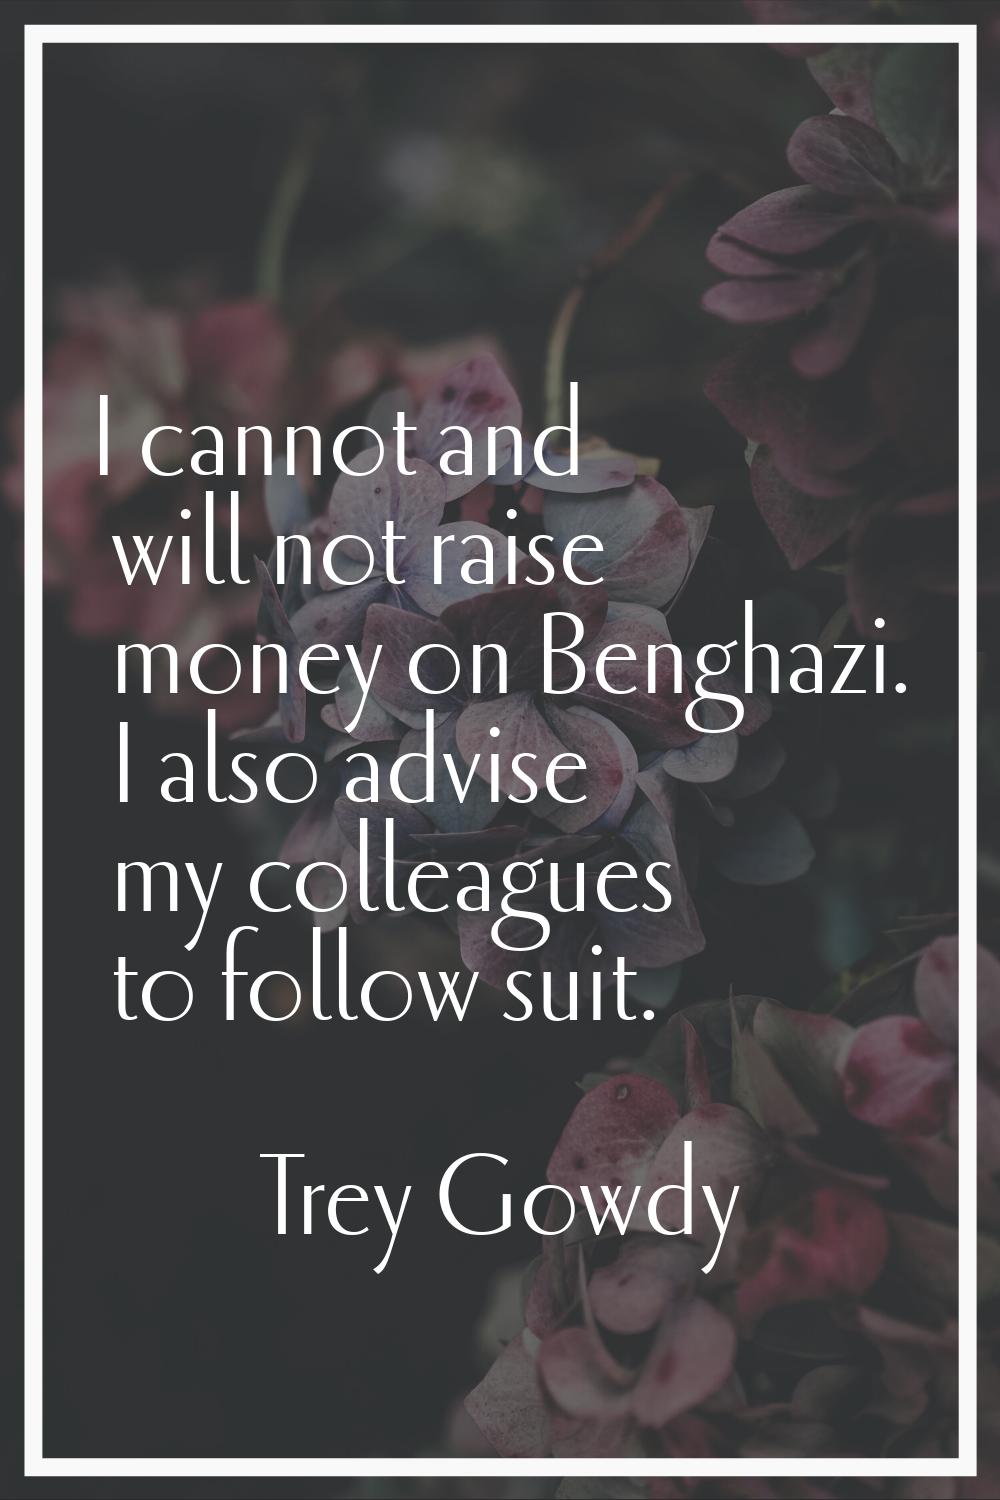 I cannot and will not raise money on Benghazi. I also advise my colleagues to follow suit.